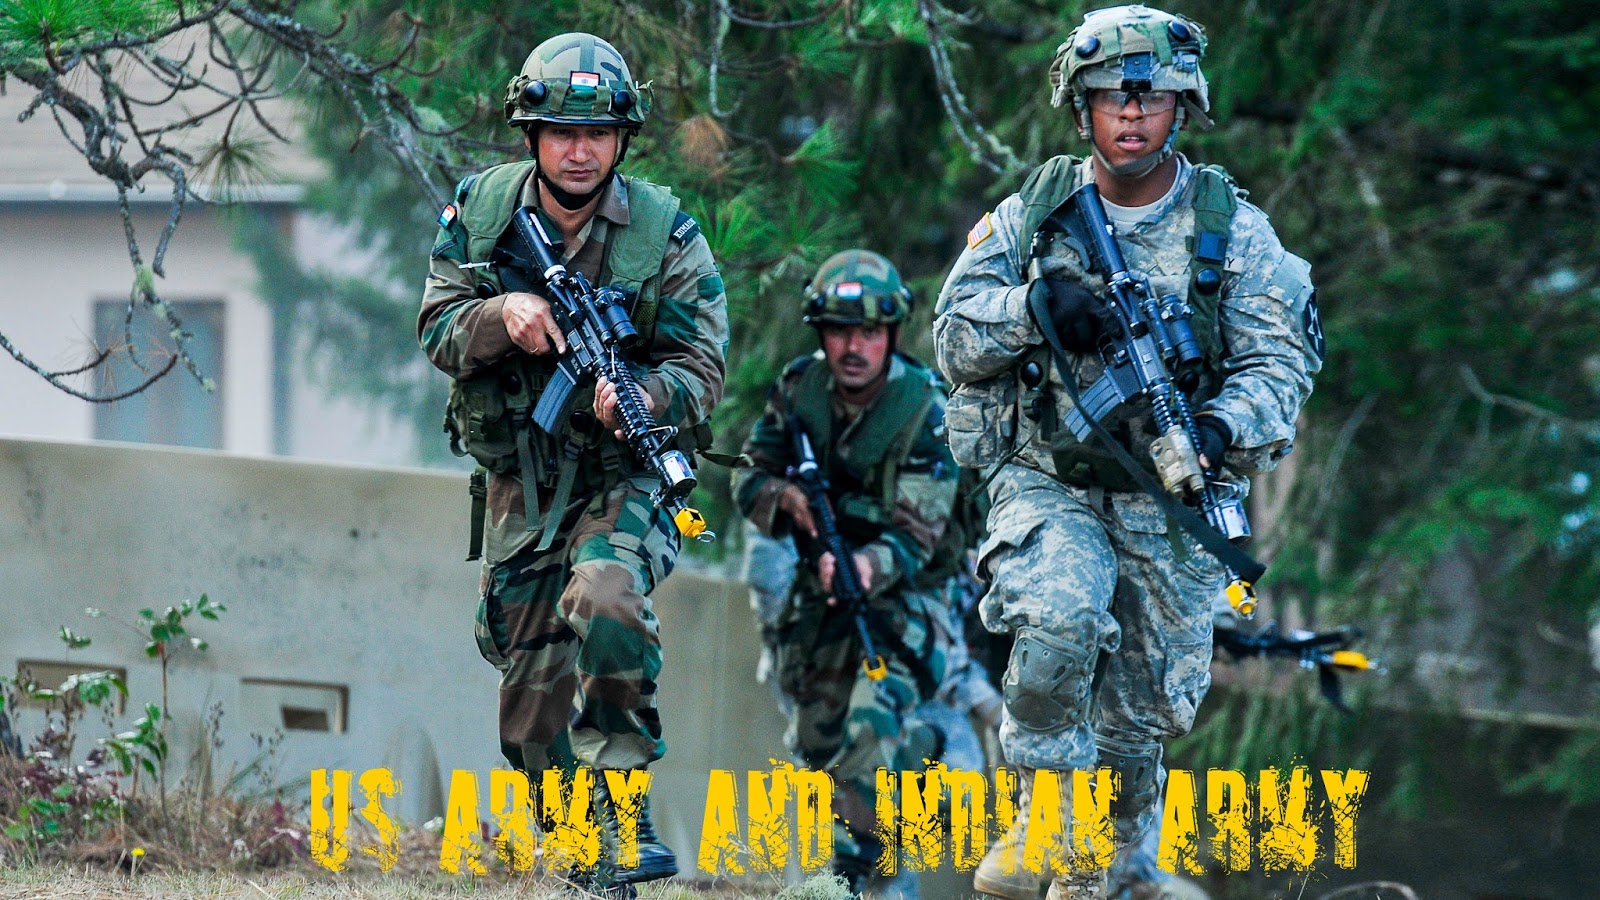 Army Hd Wallpapers Images Latest Army Full Hd Pictures - Indian Army Yudh Abhyas - HD Wallpaper 